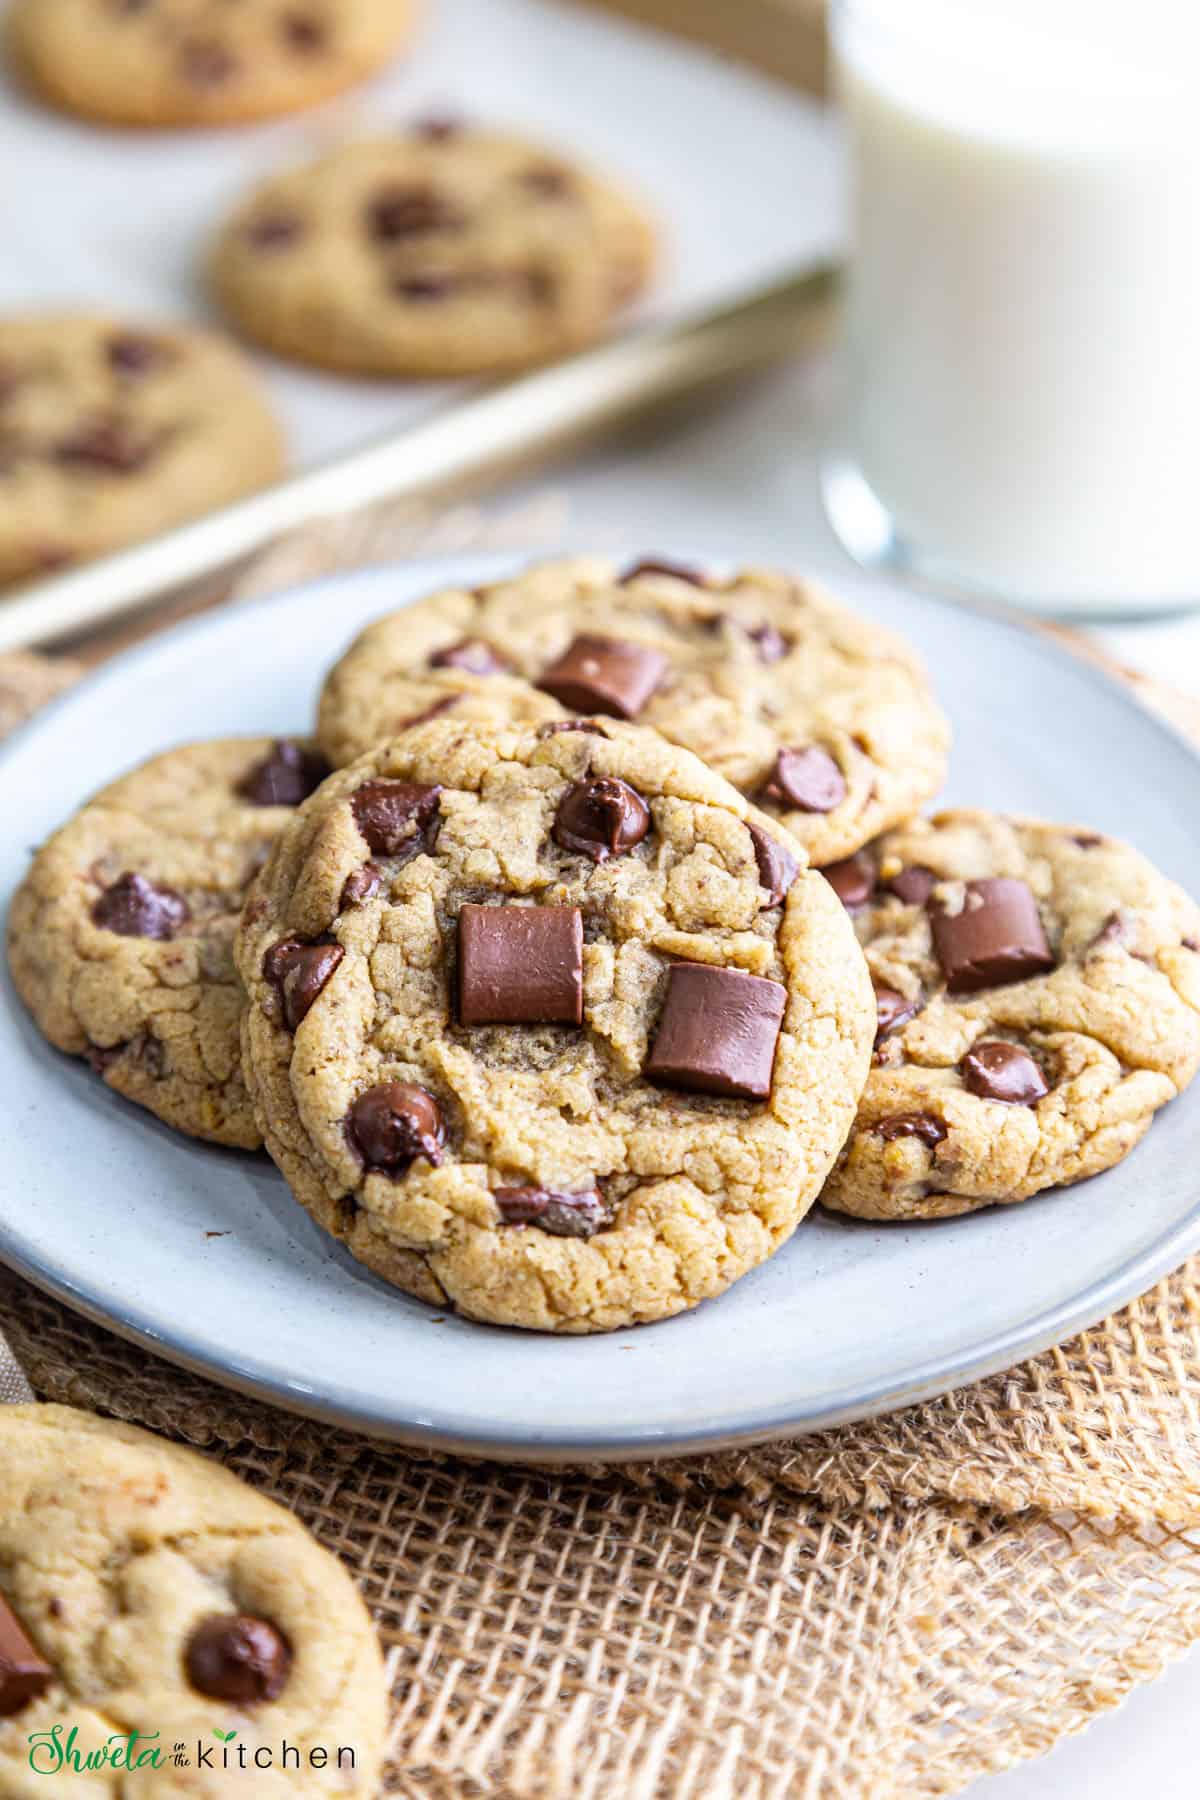 Close up view of eggless chocolate chip cookie piled on plate with other cookies